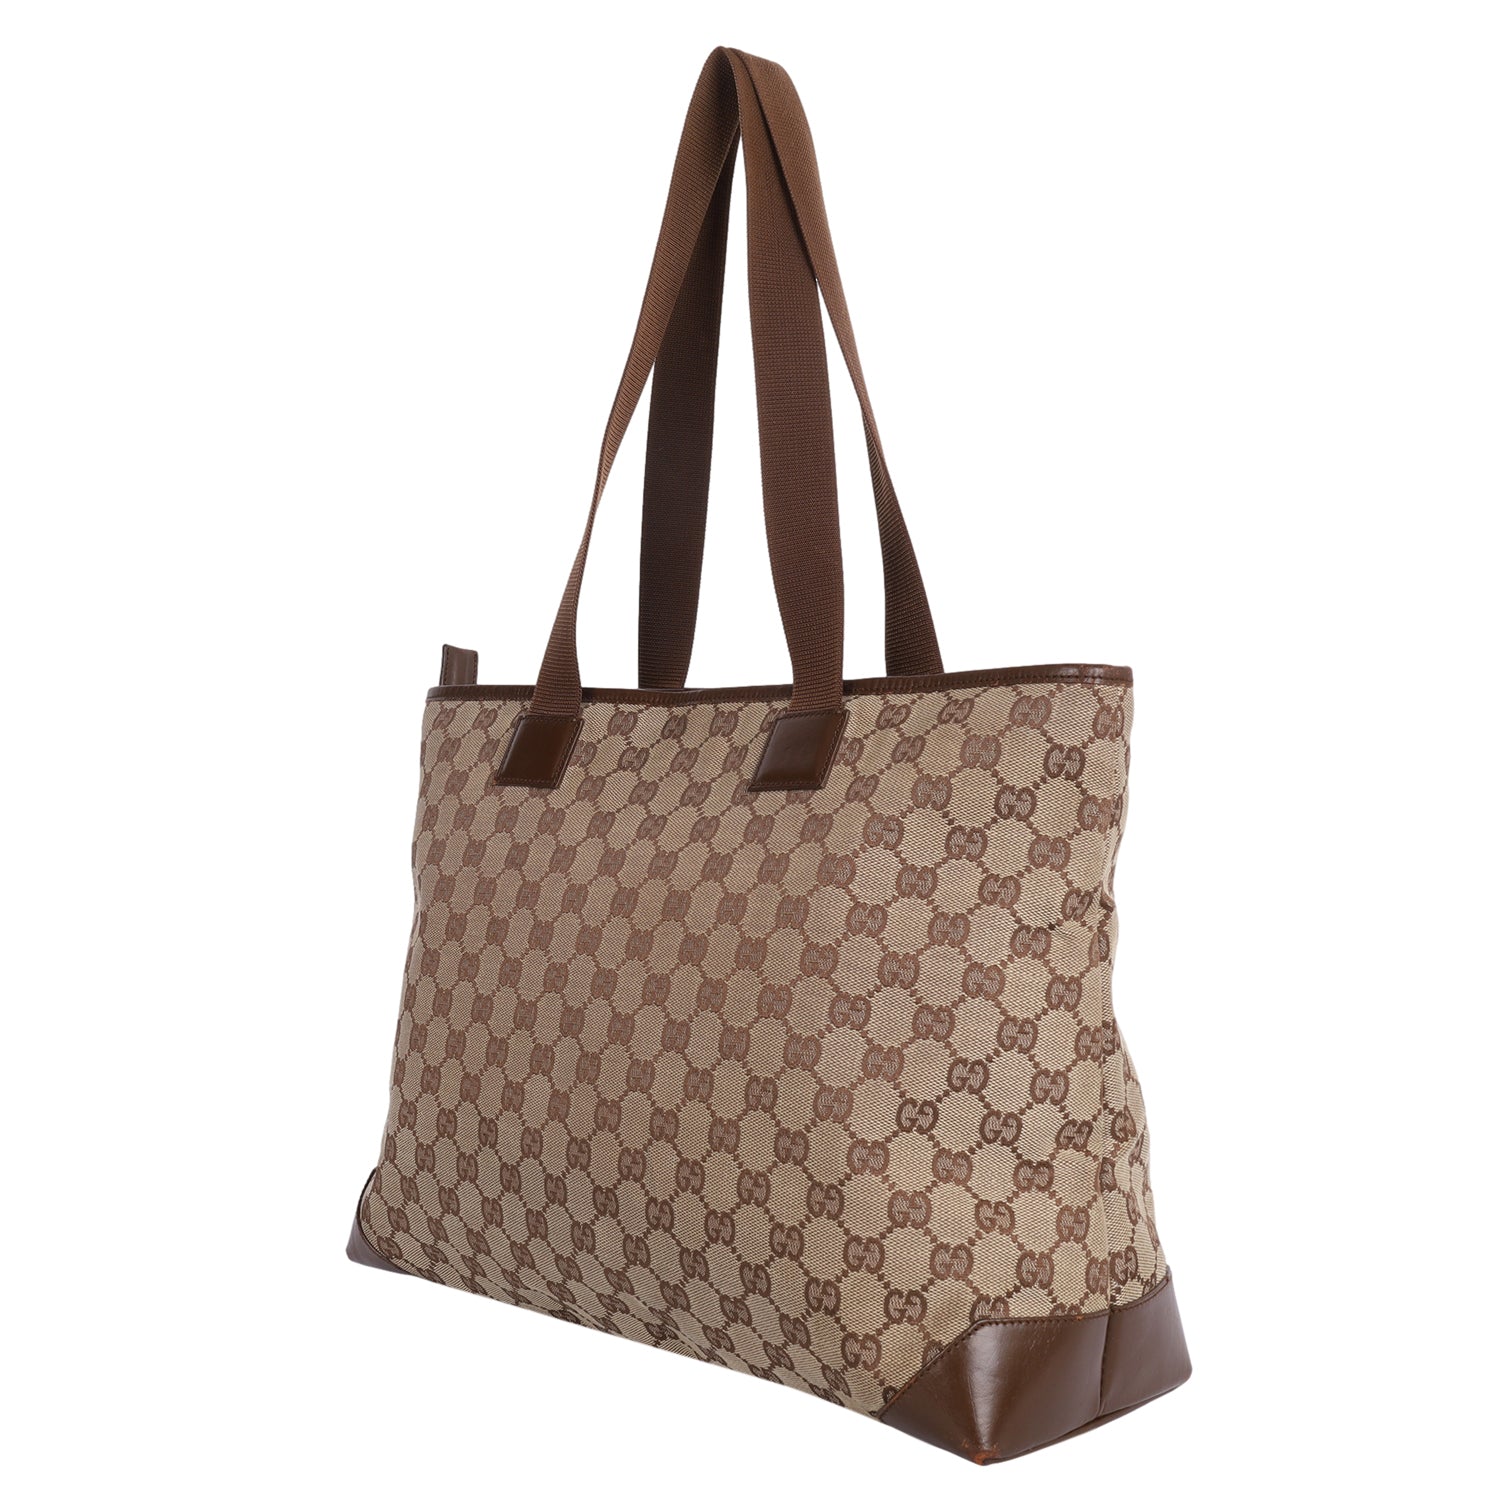 GG Supreme Canvas Tote (Authentic Pre-Owned) – The Lady Bag